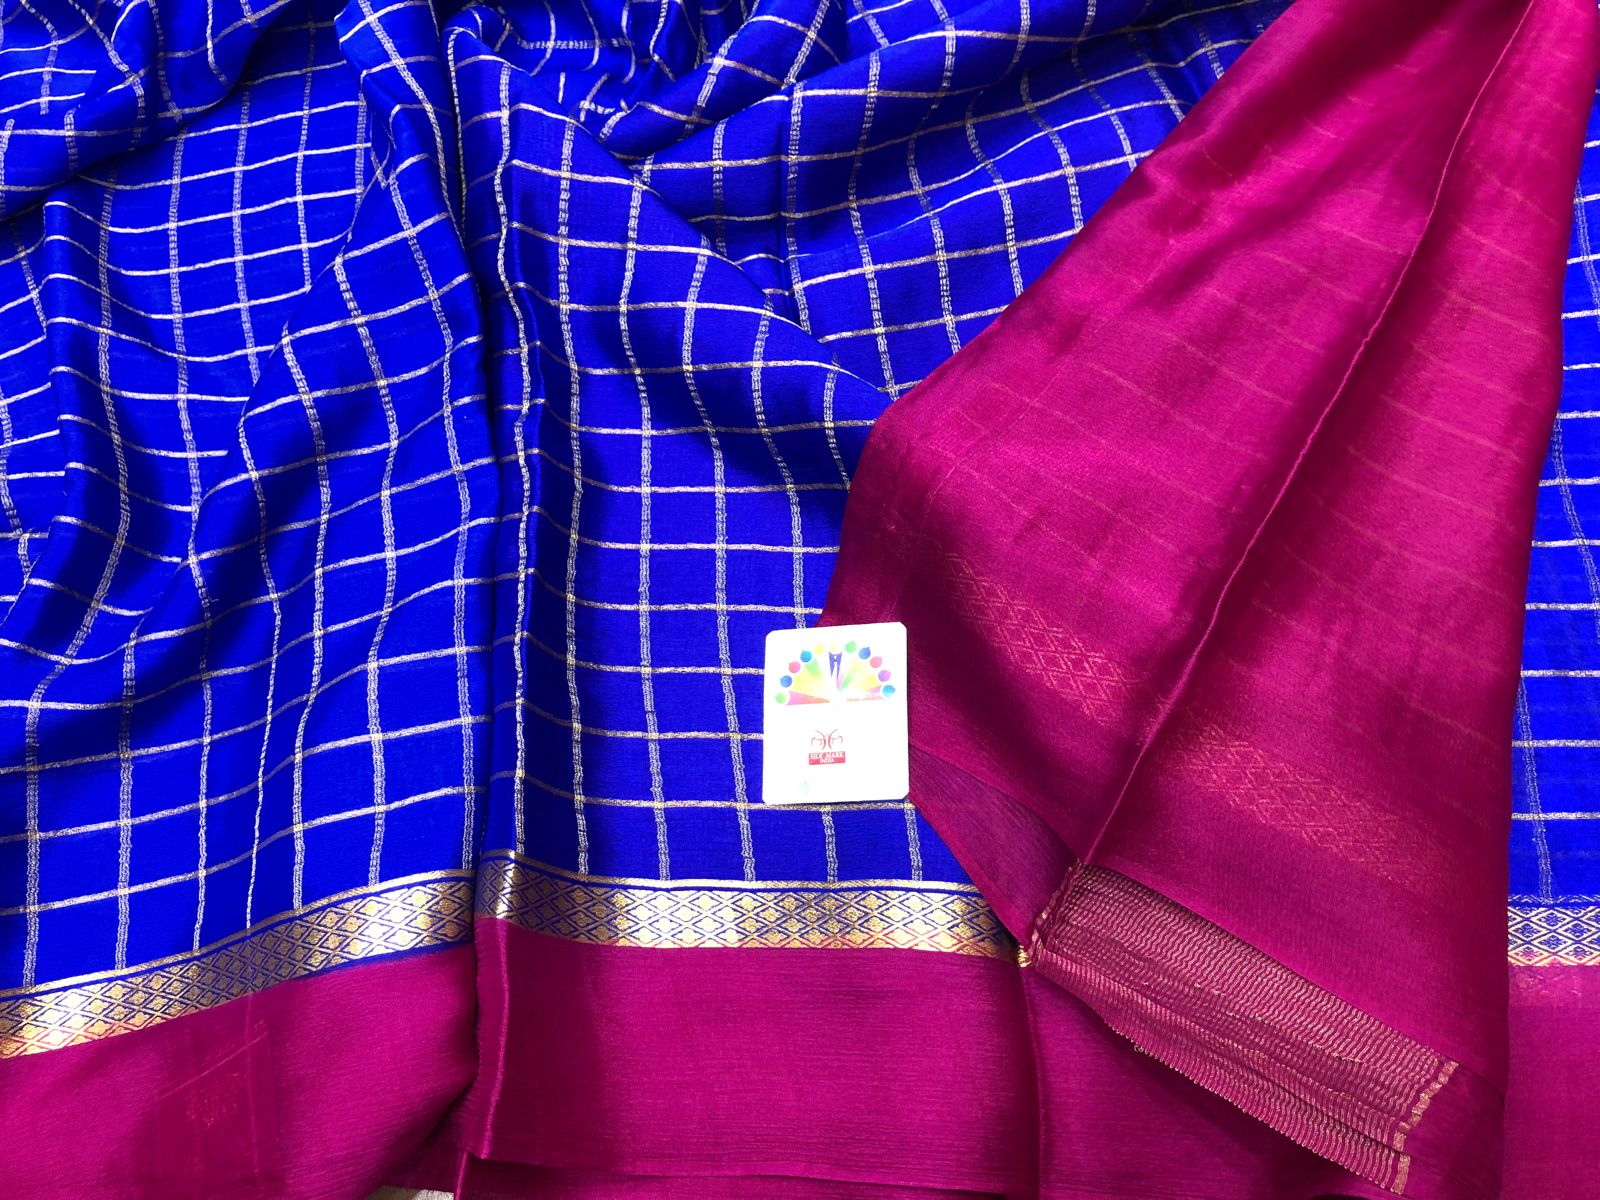 Mysore Silk Sarees: An Insight Into Their History And Style